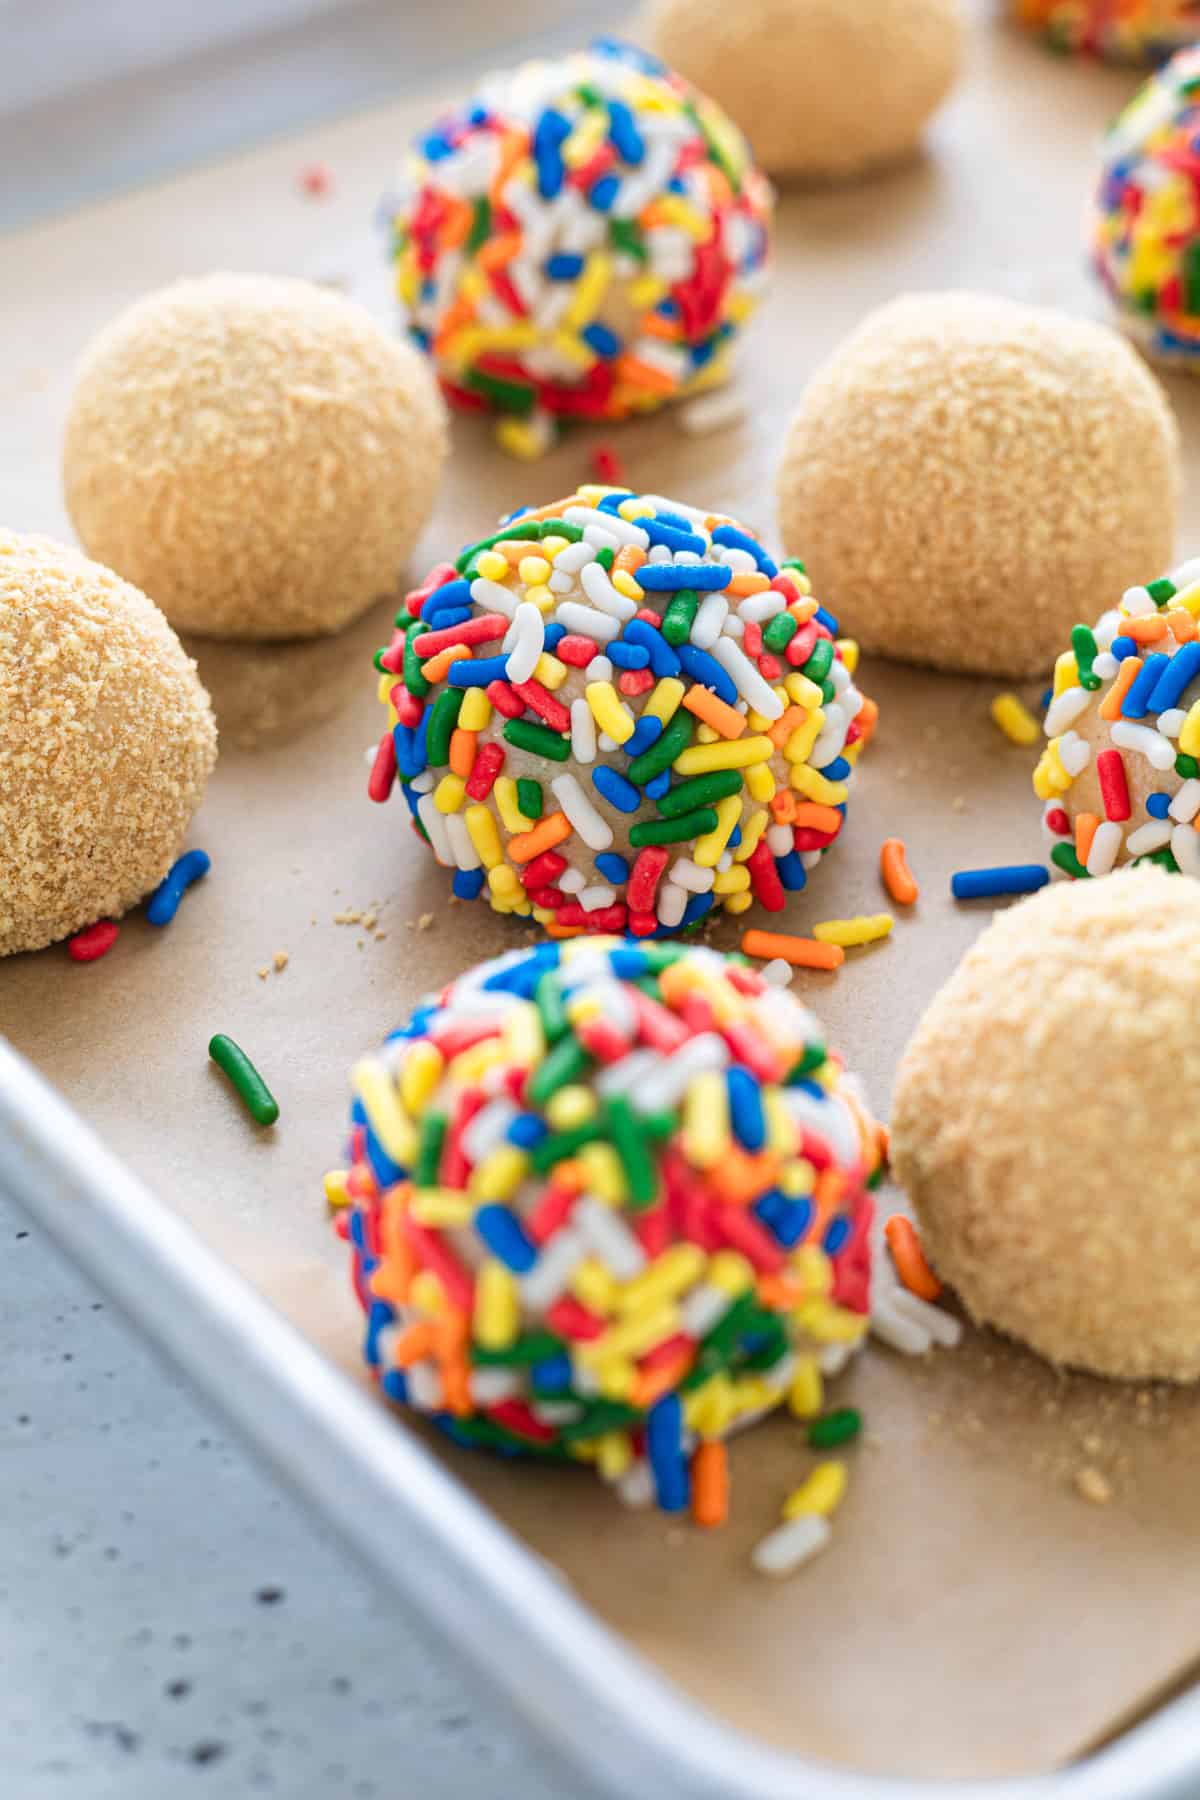 Cheesecake balls on a parchment-lined tray.